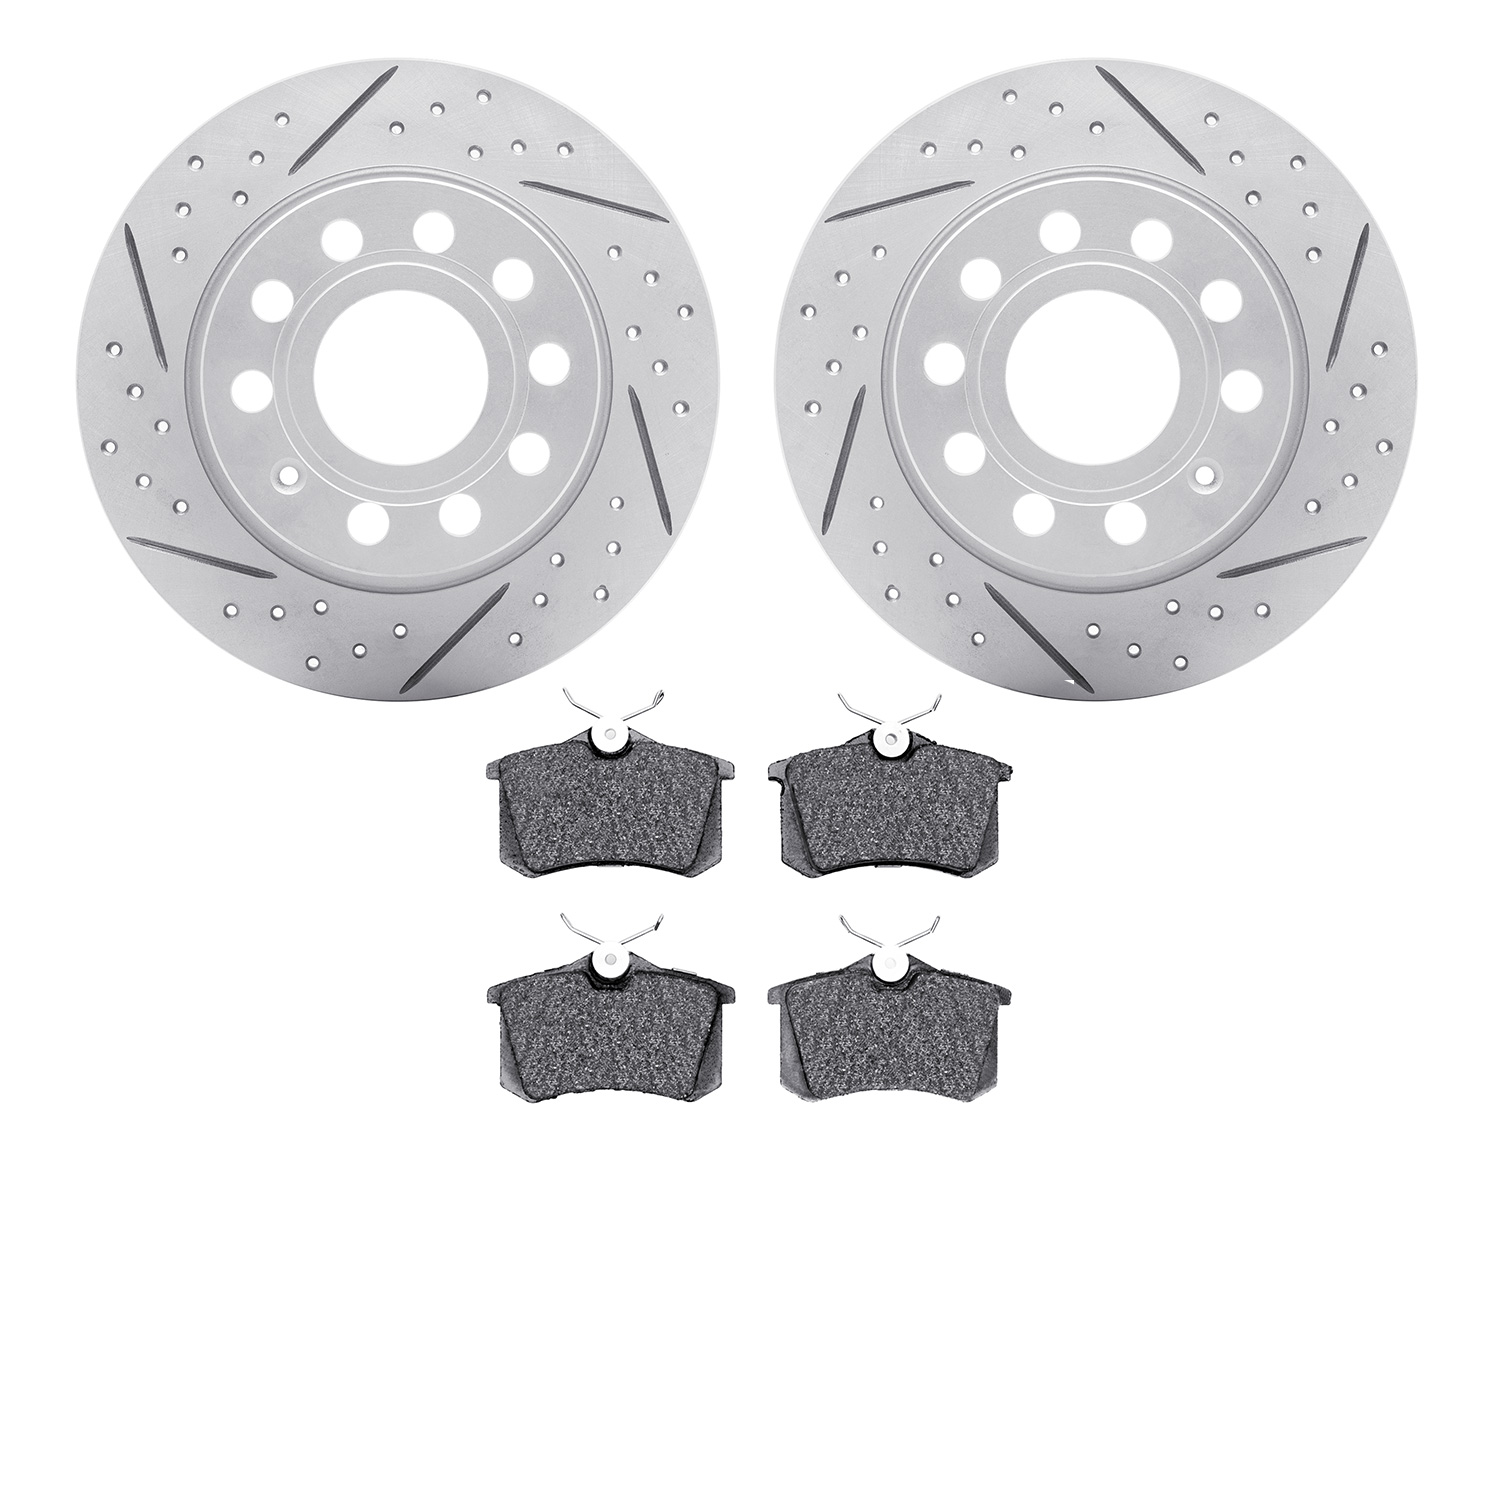 2502-74054 Geoperformance Drilled/Slotted Rotors w/5000 Advanced Brake Pads Kit, 2010-2013 Audi/Volkswagen, Position: Rear